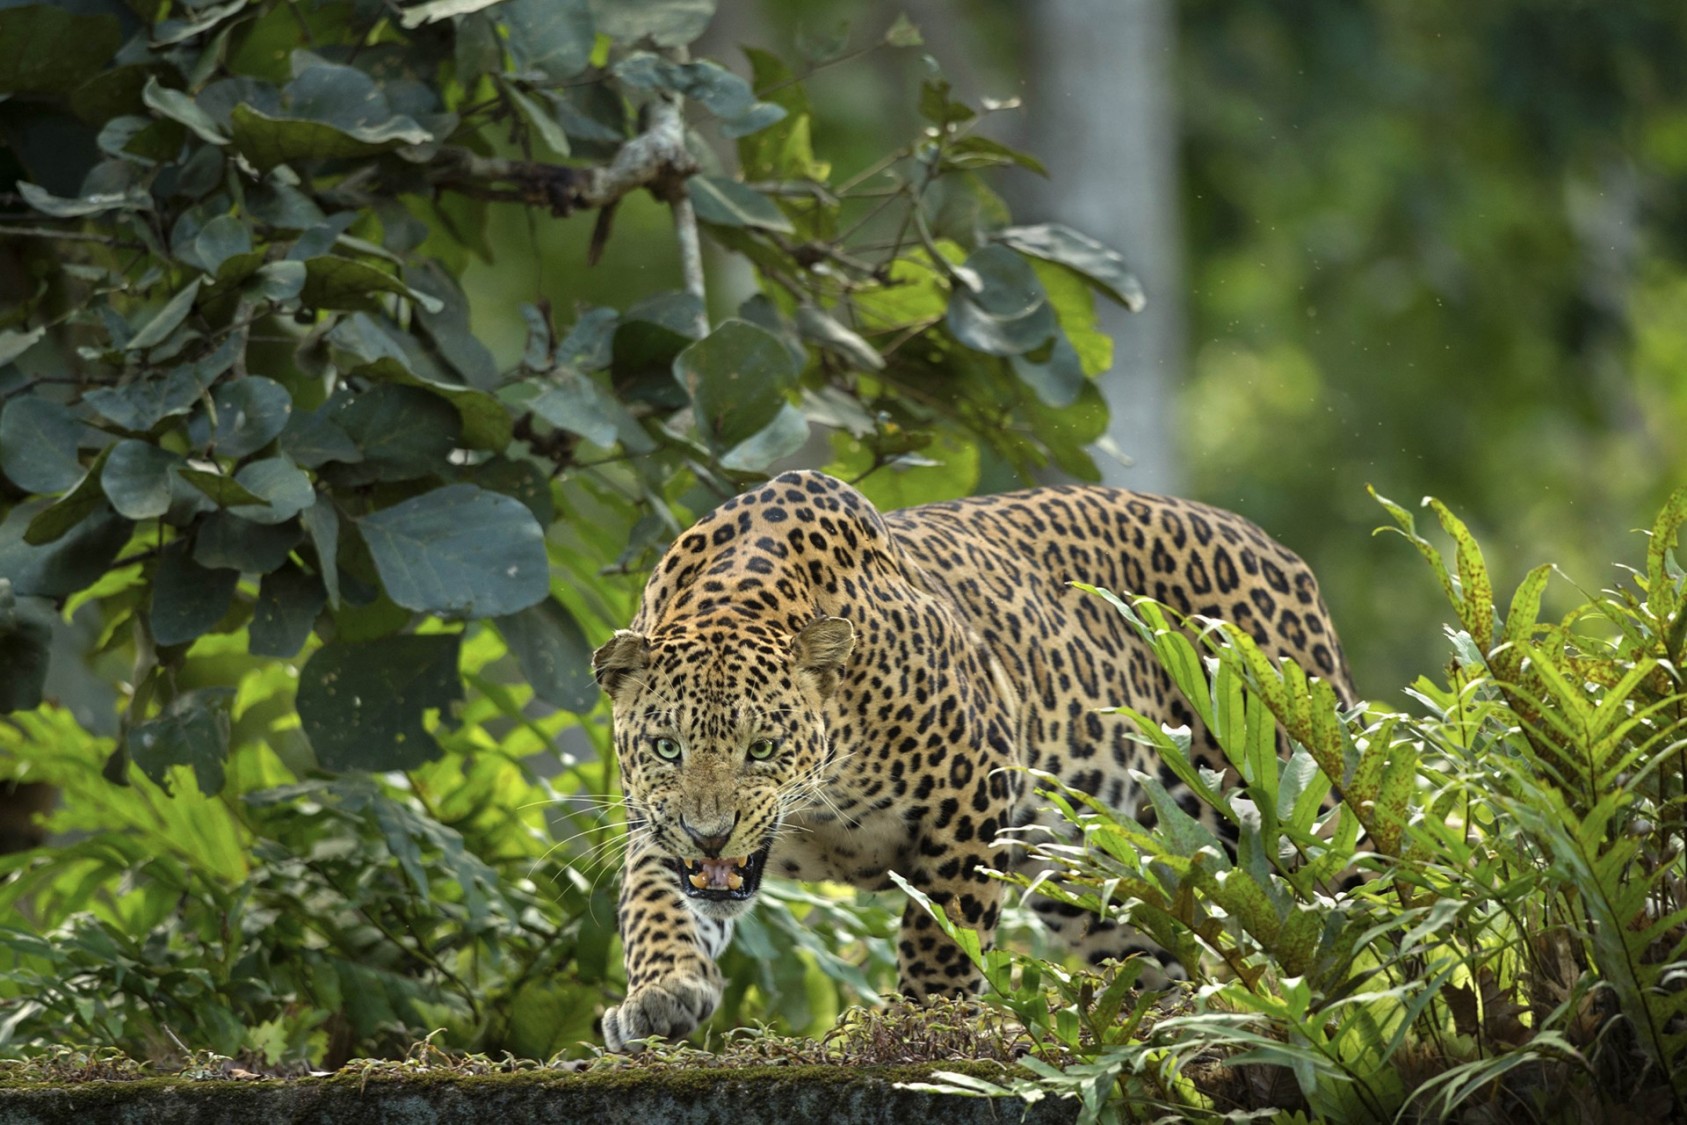 A large male leopard guards his kill behind the ferns.  Although leopards are fierce predators, they share the forest with other large carnivores like tigers and dholes, and are often required to defend the spoils of their hunt.